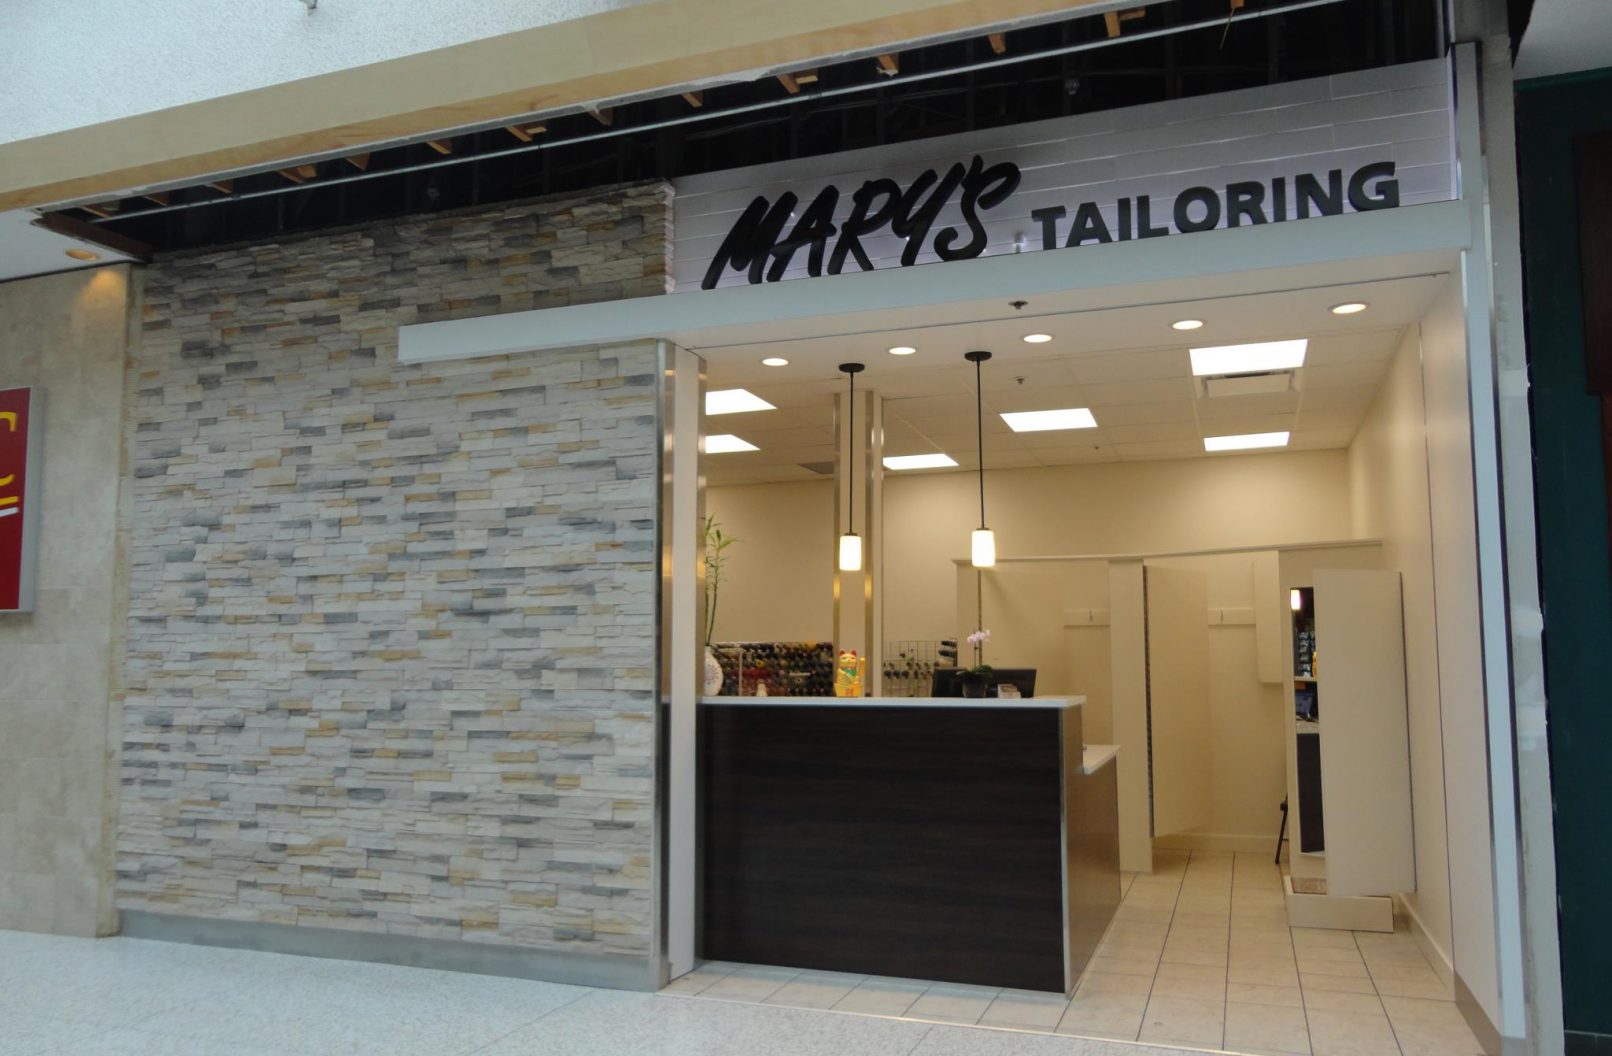 SOL Sustainable - Our Work - Commerical Renovations - Mary's Tailoring